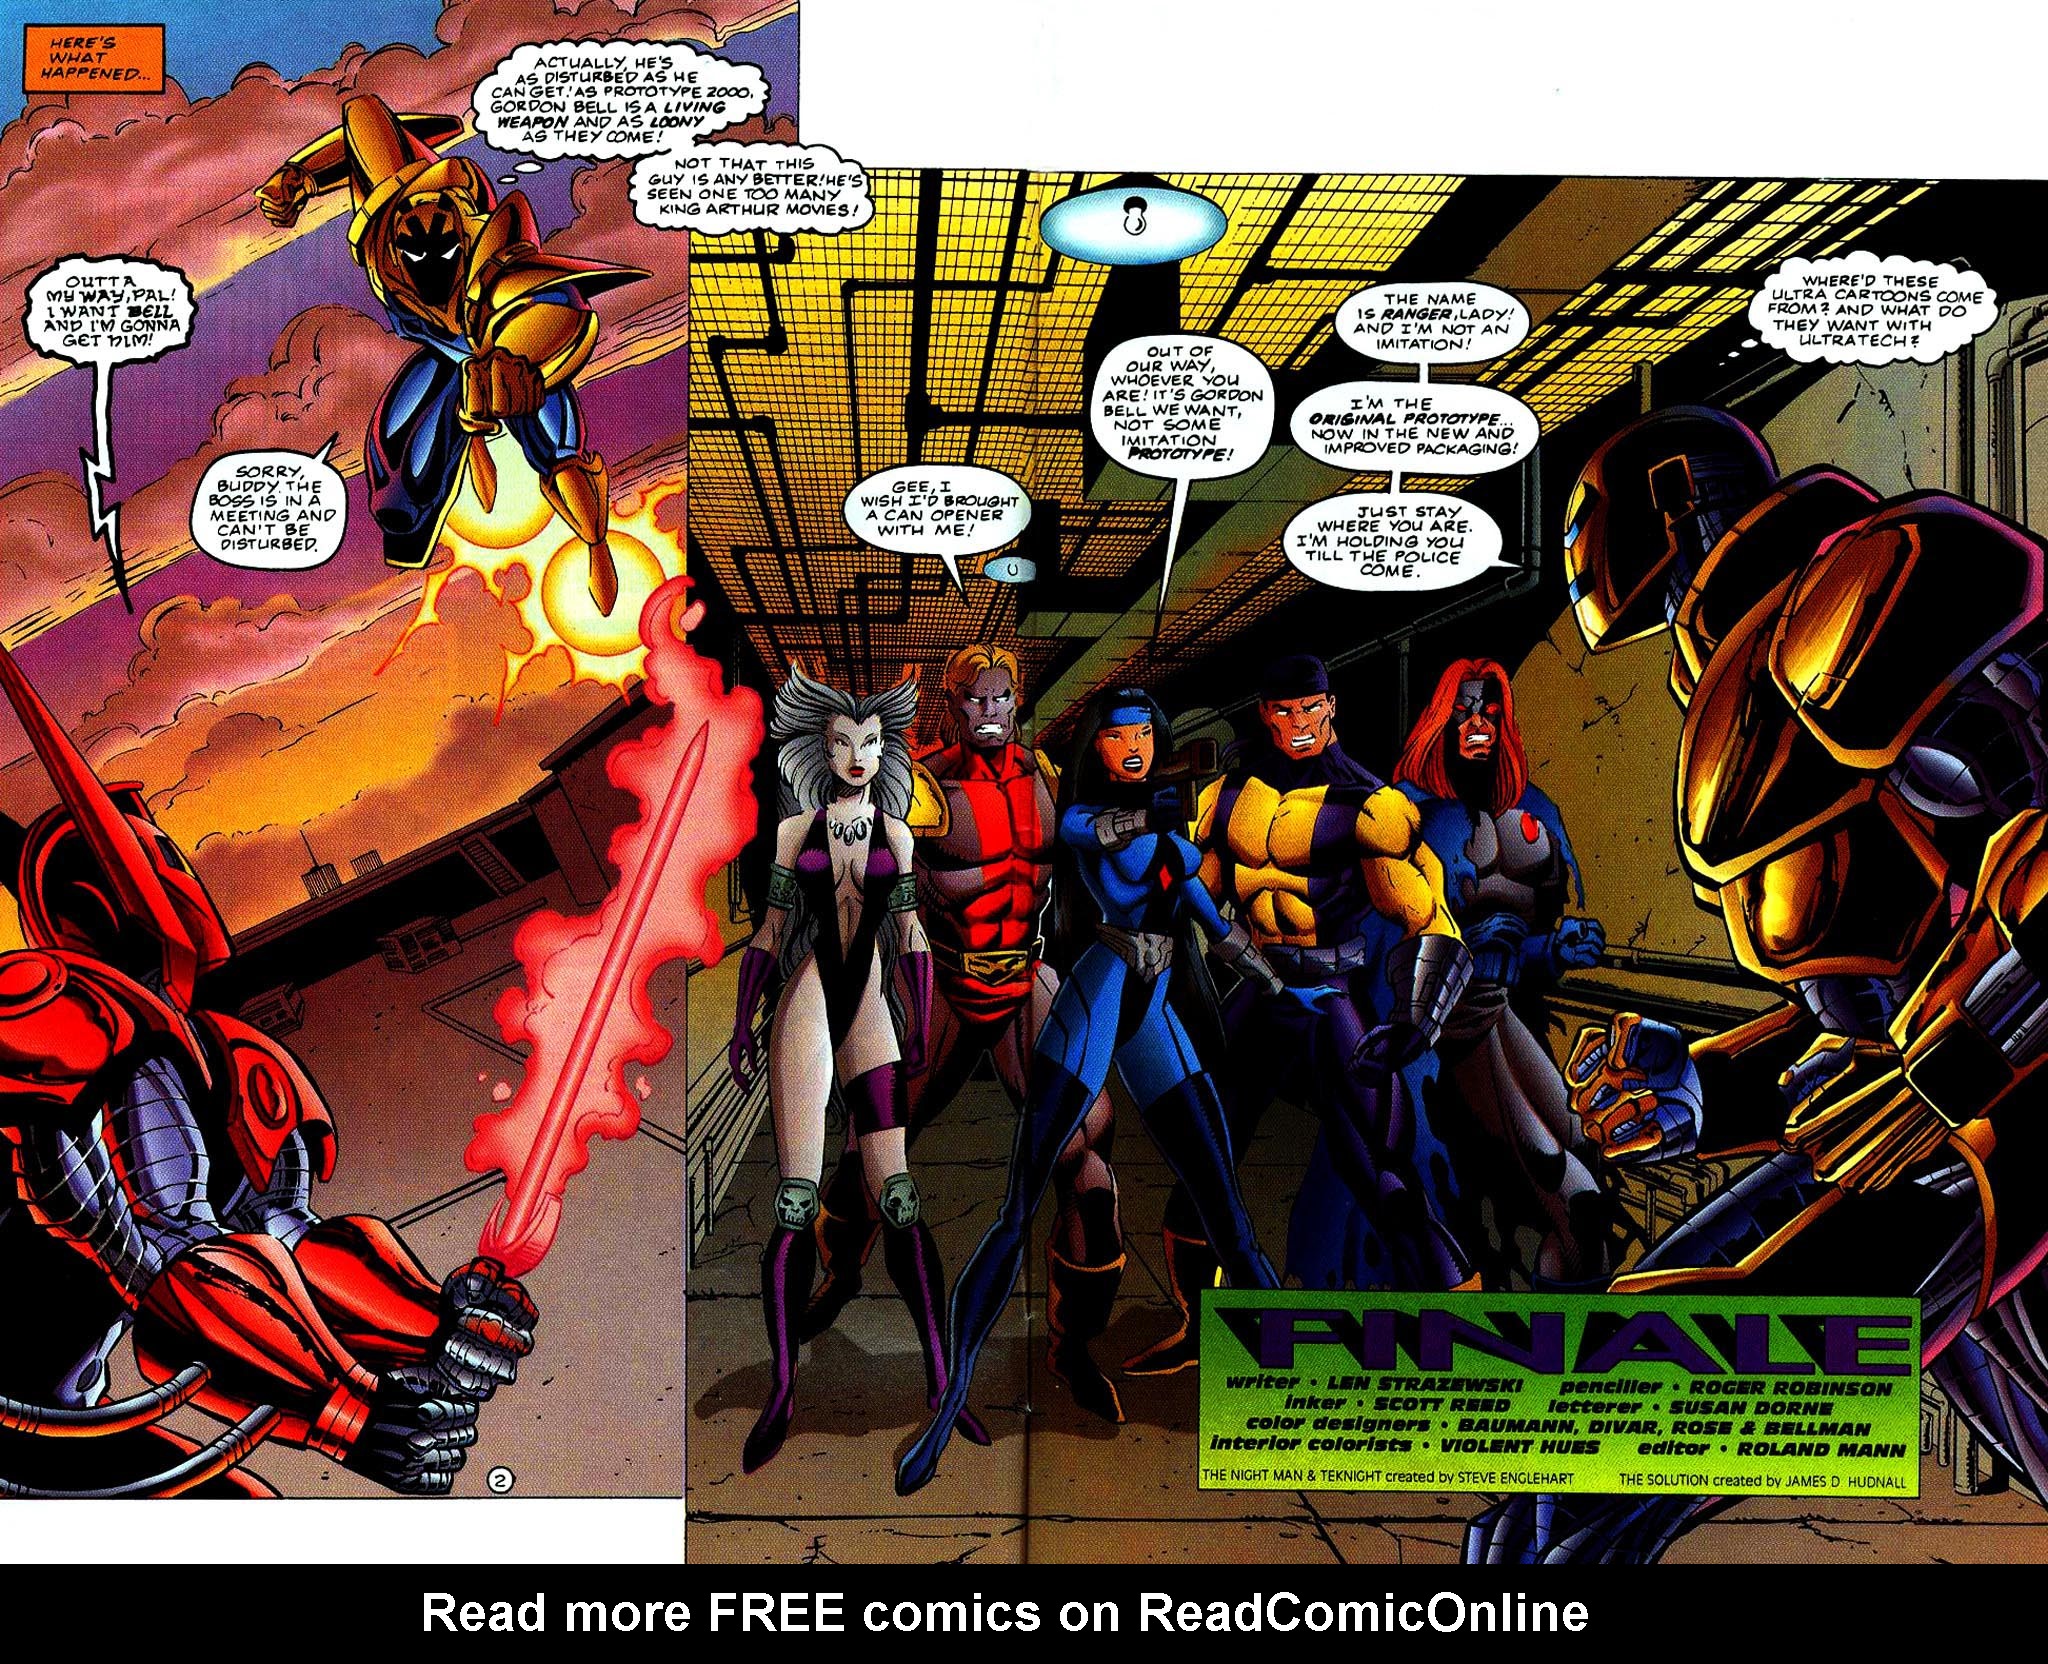 Read online Giant-Size Prototype comic -  Issue # Full - 5